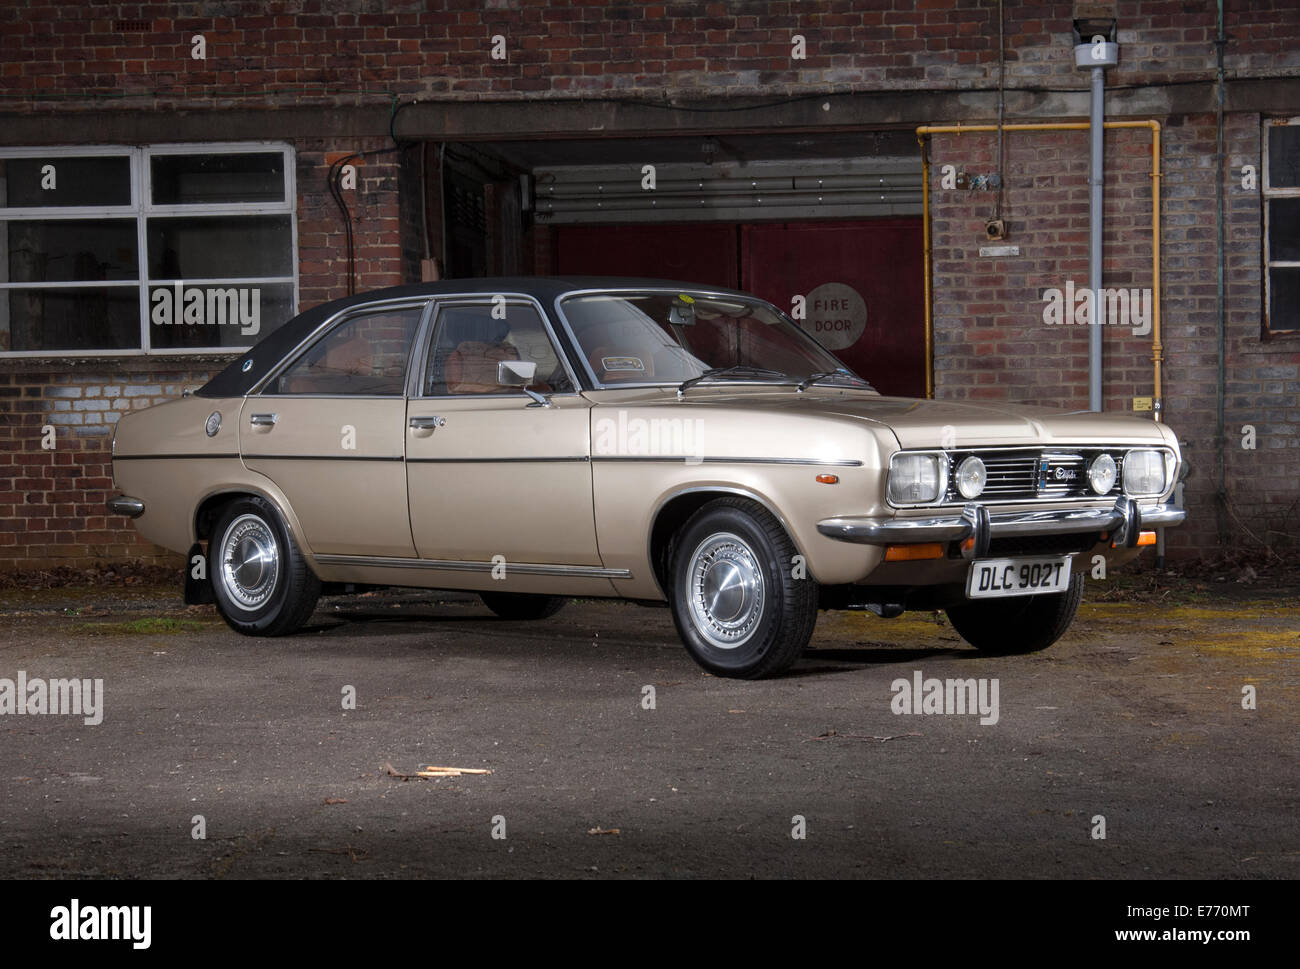 1979 Chrysler 180 2 litre classic car, known as the Simca 1610 in France  Stock Photo - Alamy